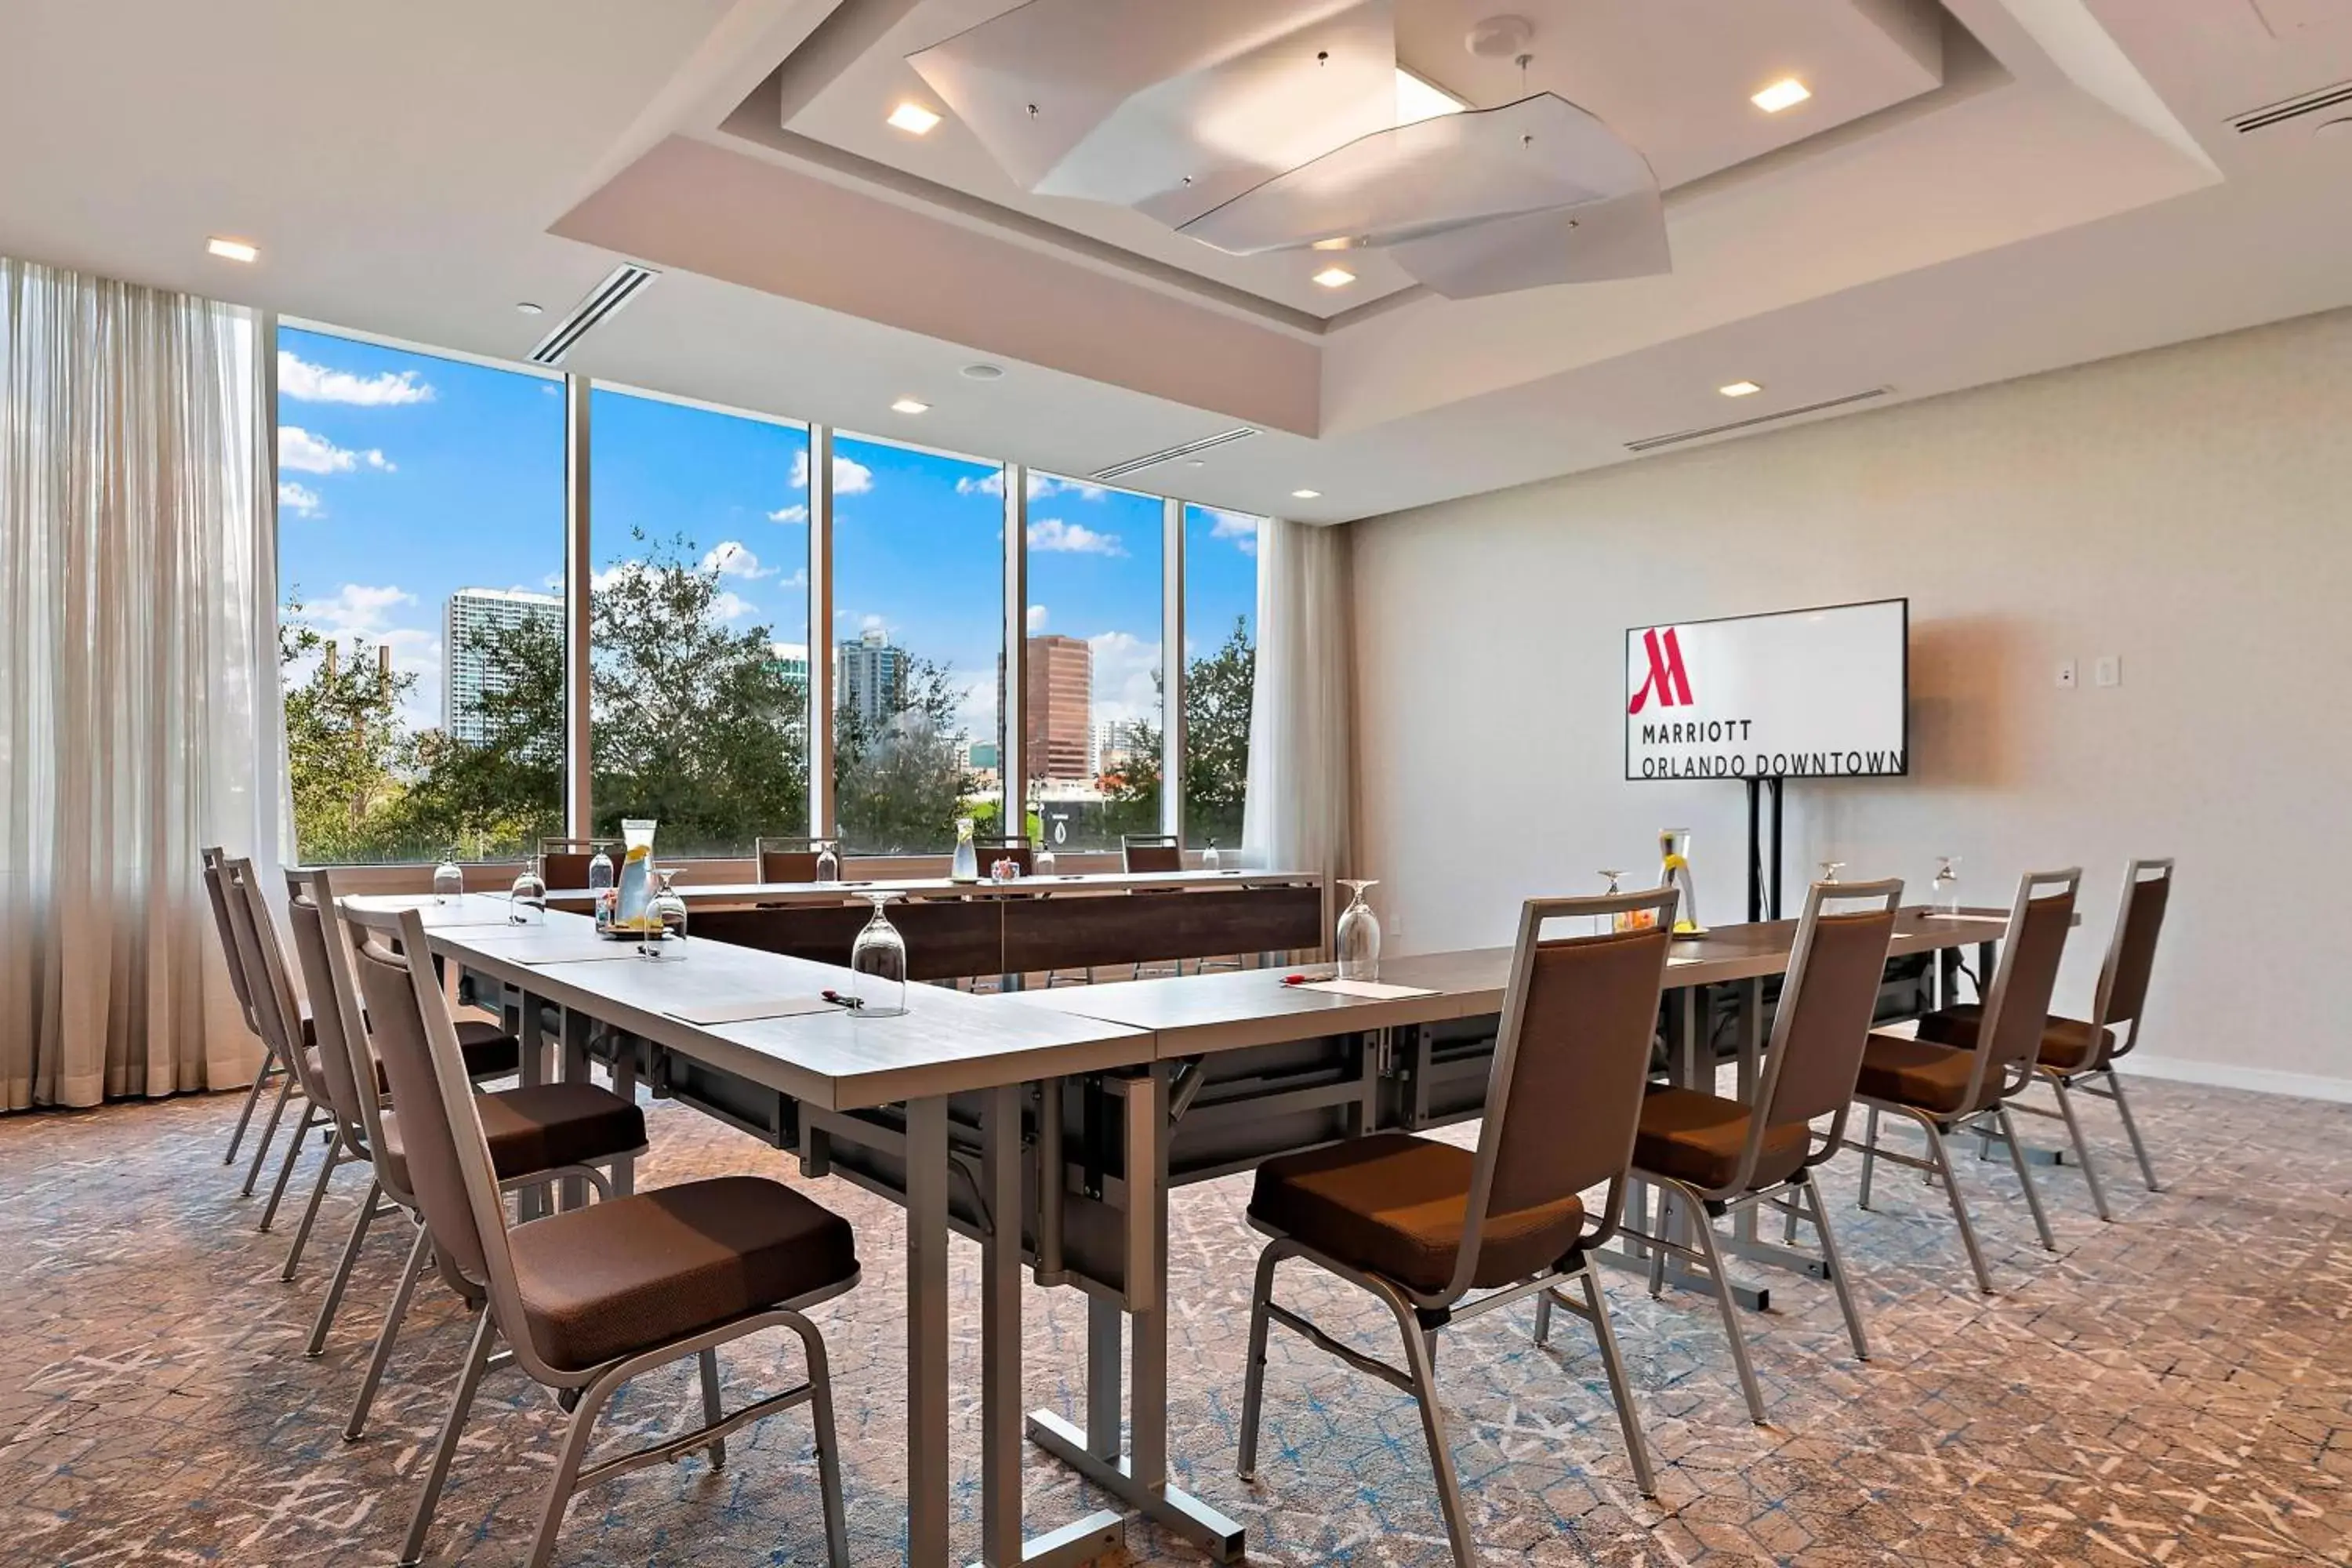 Meeting/conference room in Marriott Orlando Downtown